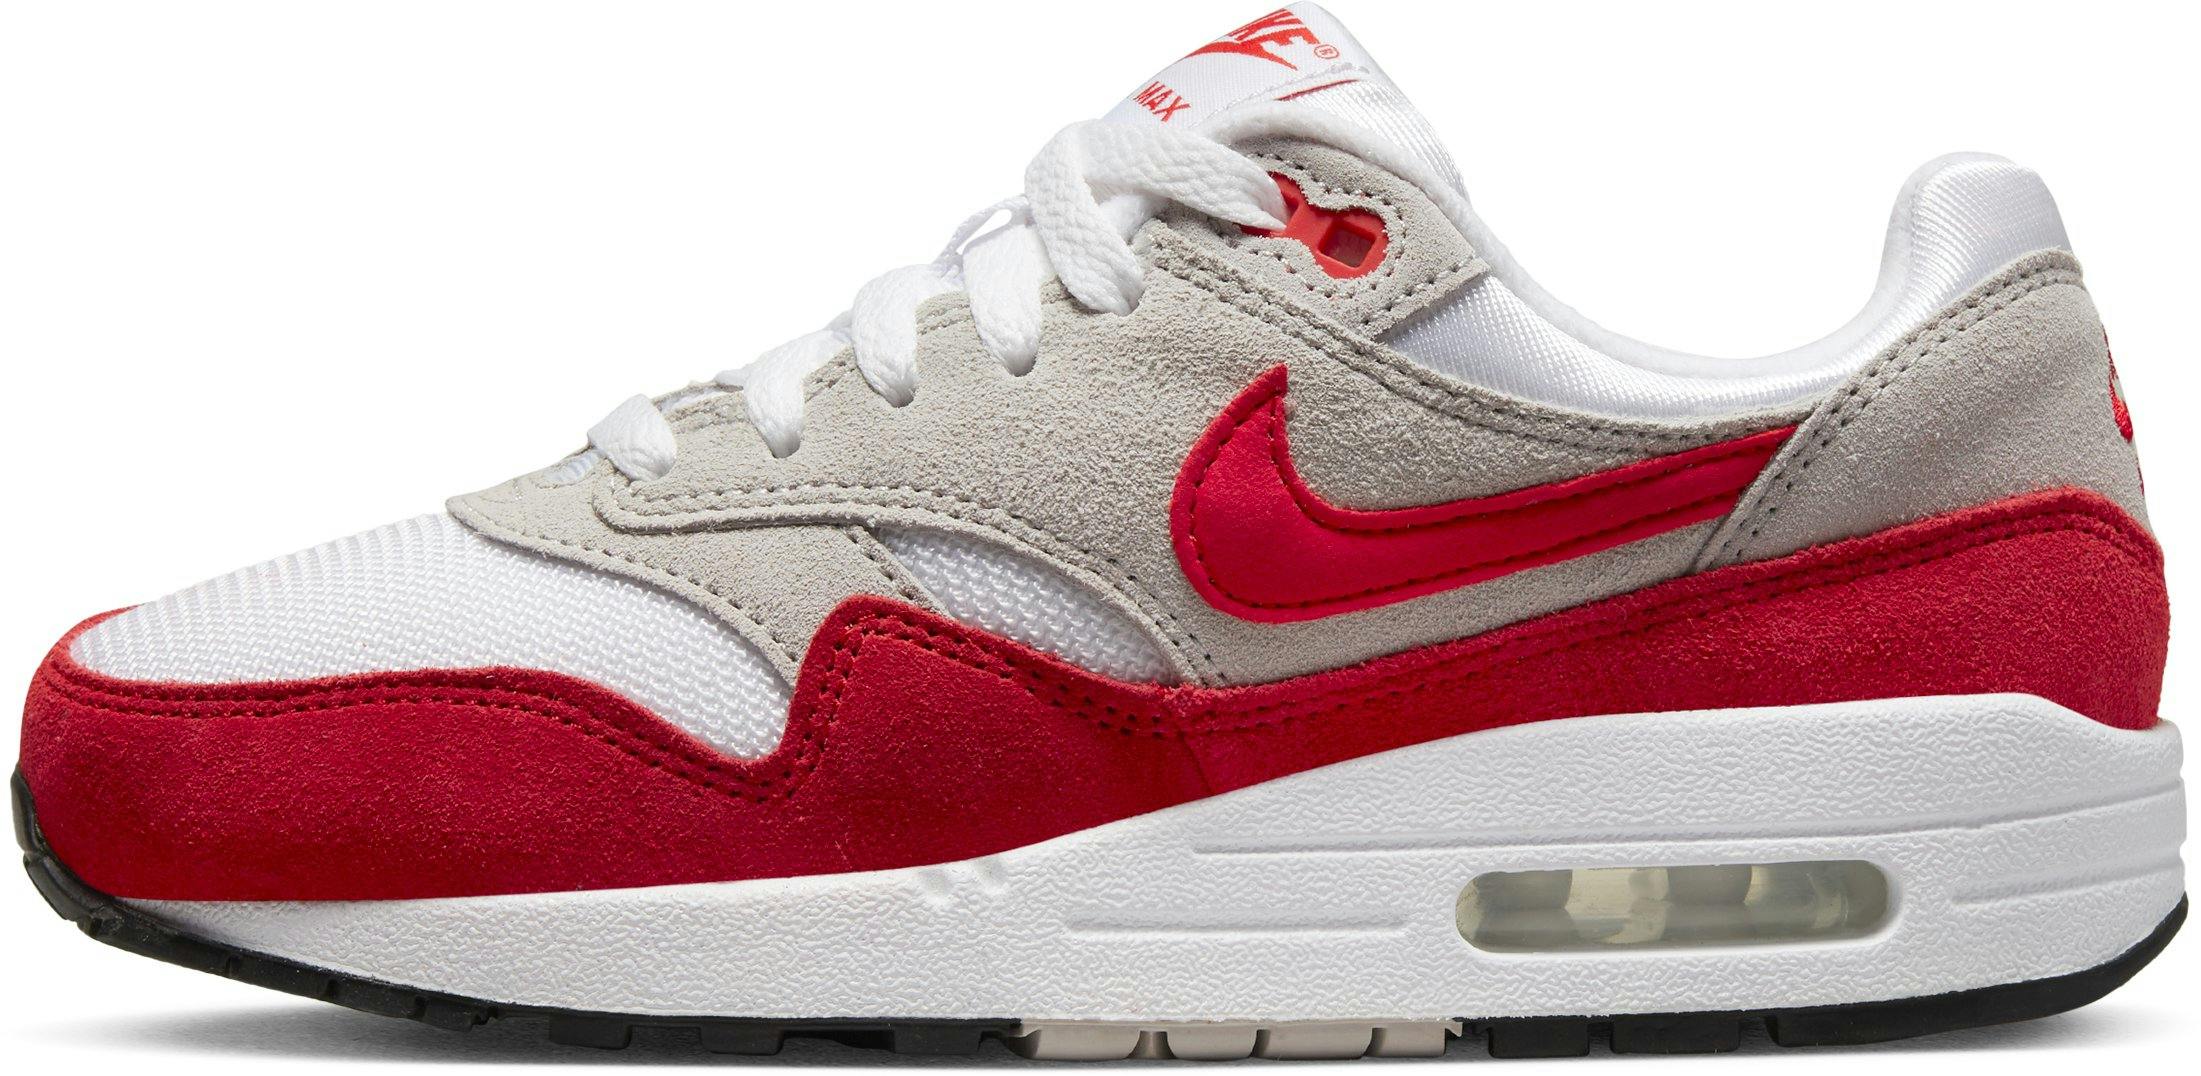 Nike Air Max 1 OG GS 'Challenge Red' | 555766-146 | Sneaker Squad